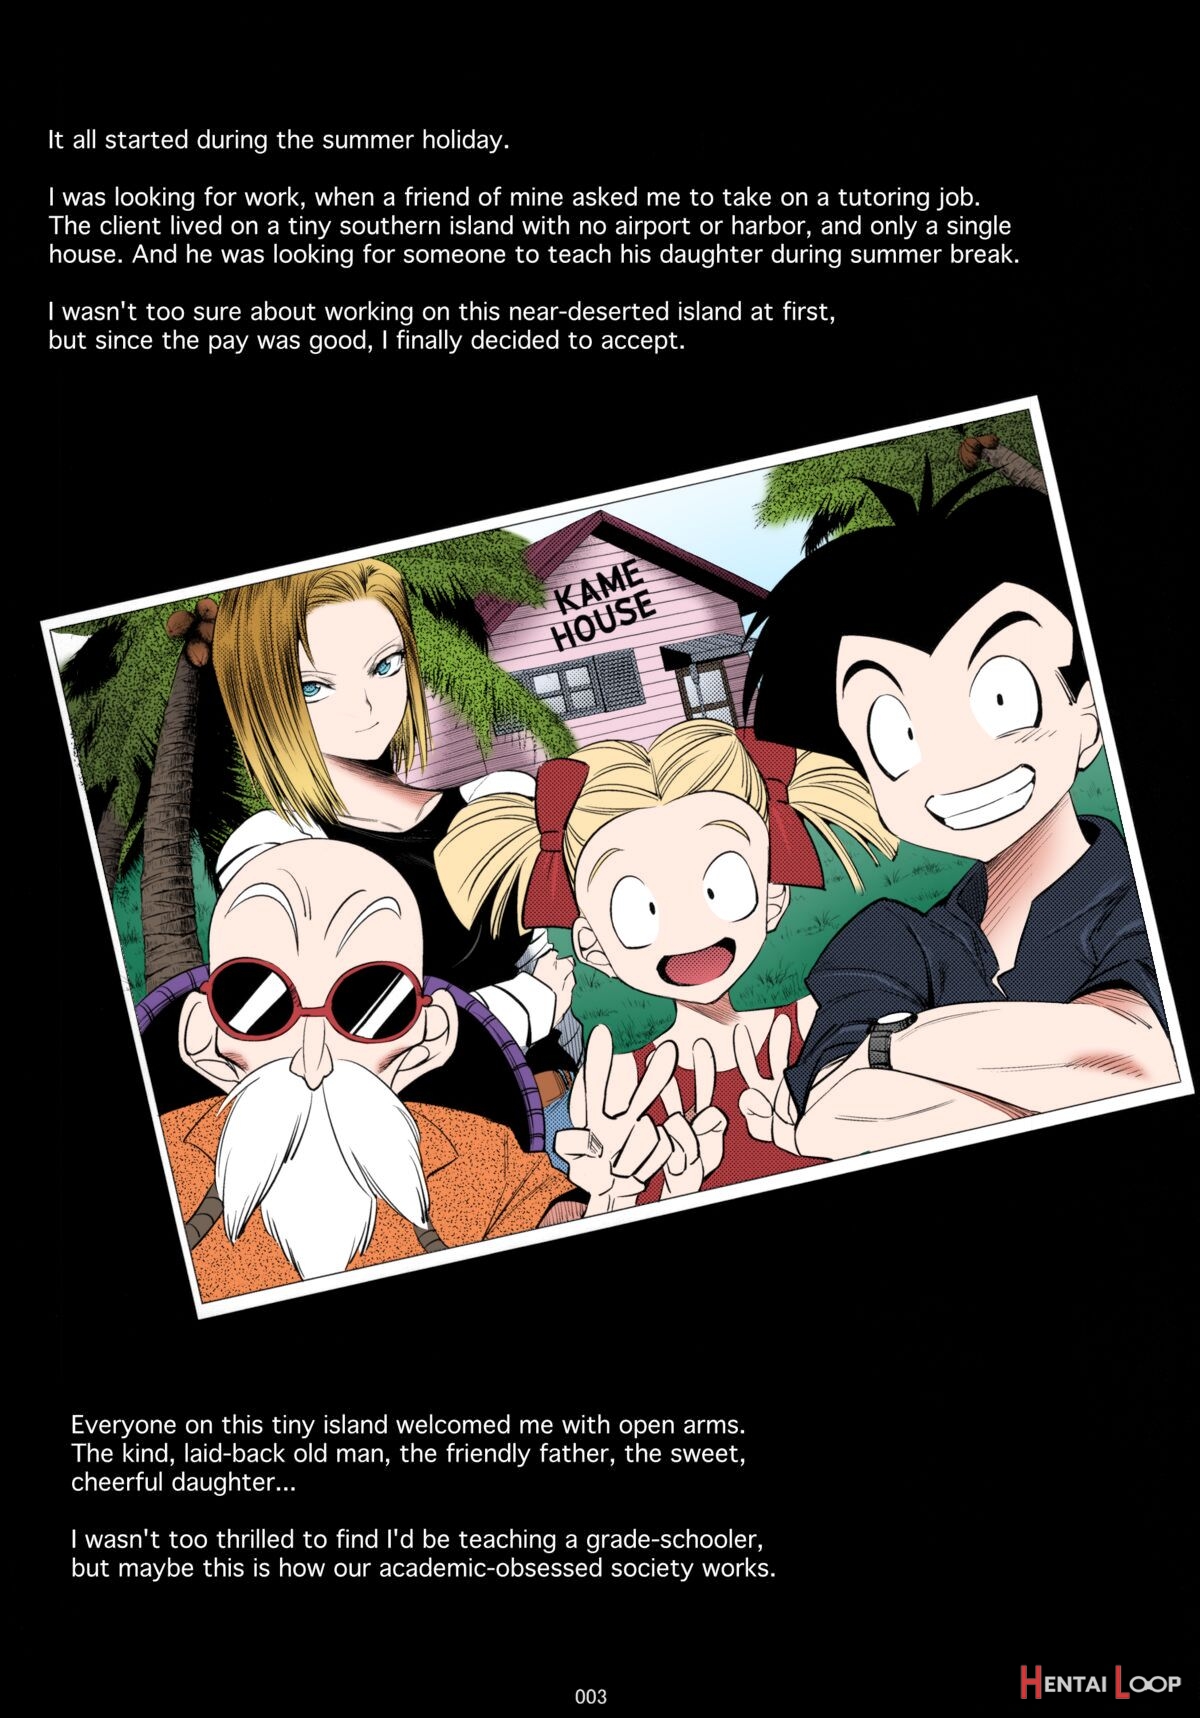 Android 18's Hypnosis Ntr page 2